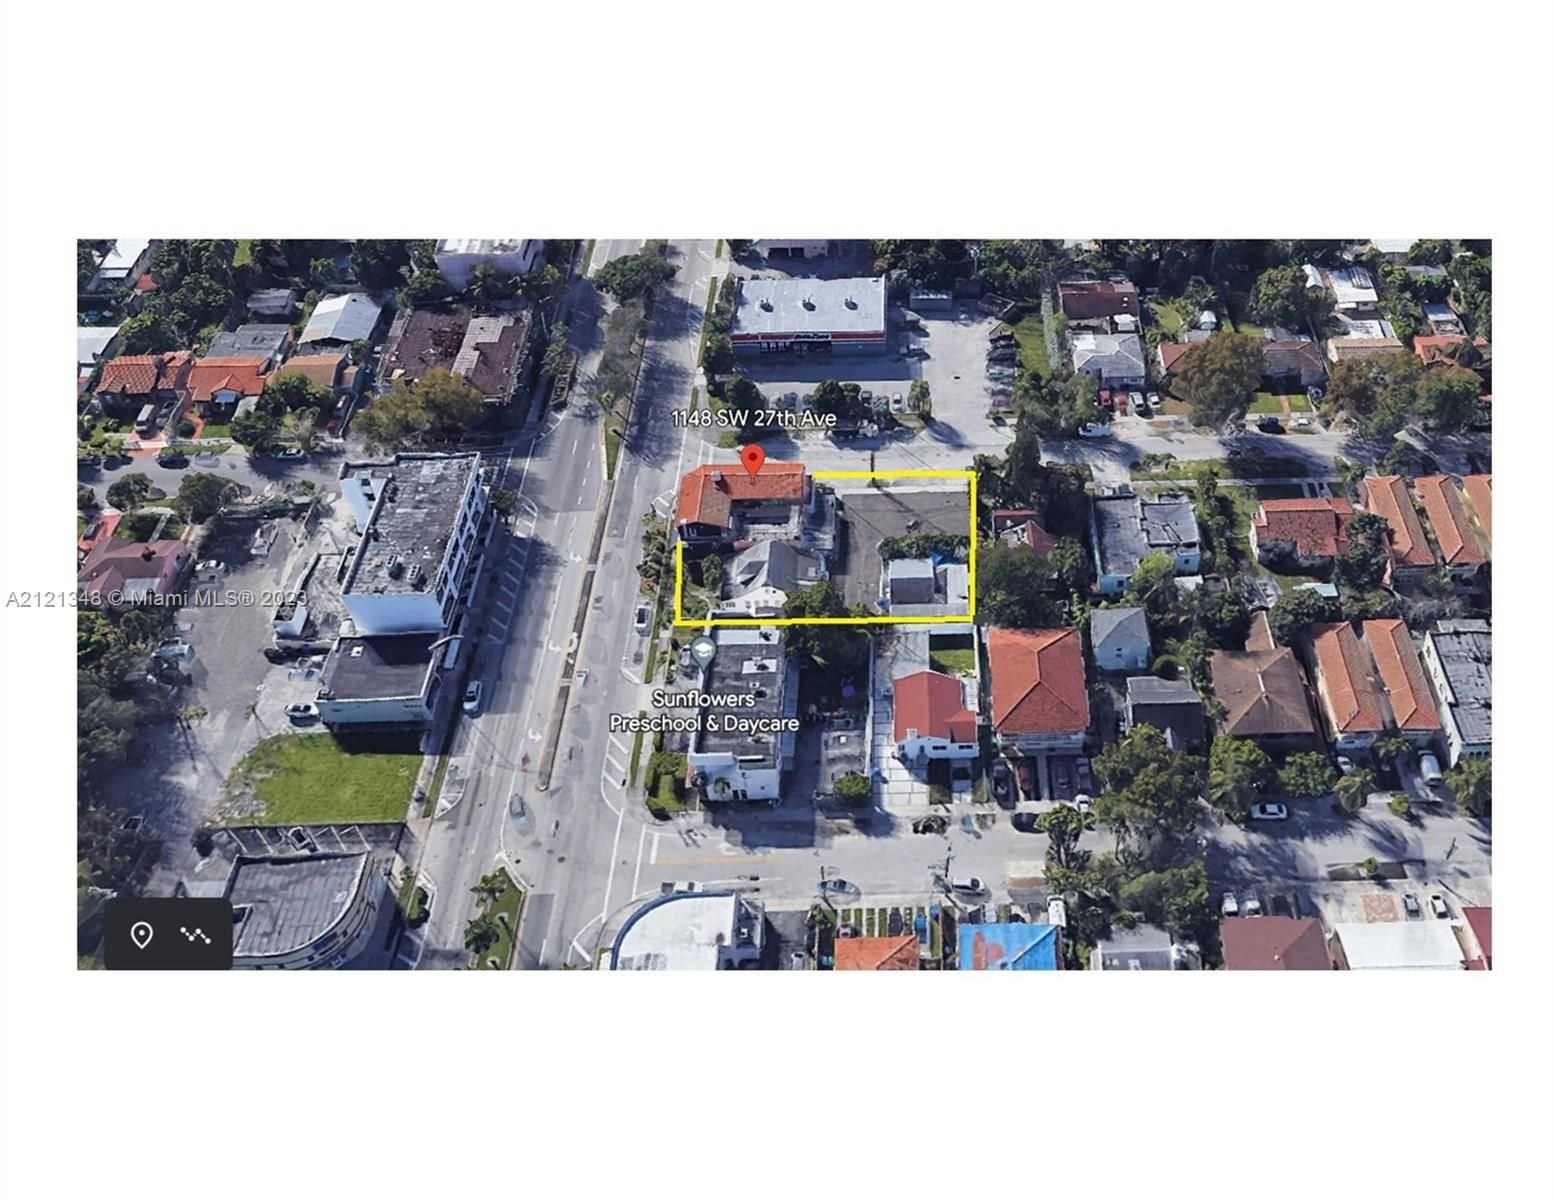 Real estate property located at 1148 27 AV, Miami-Dade County, WEBSTER TERRACE, Miami, FL